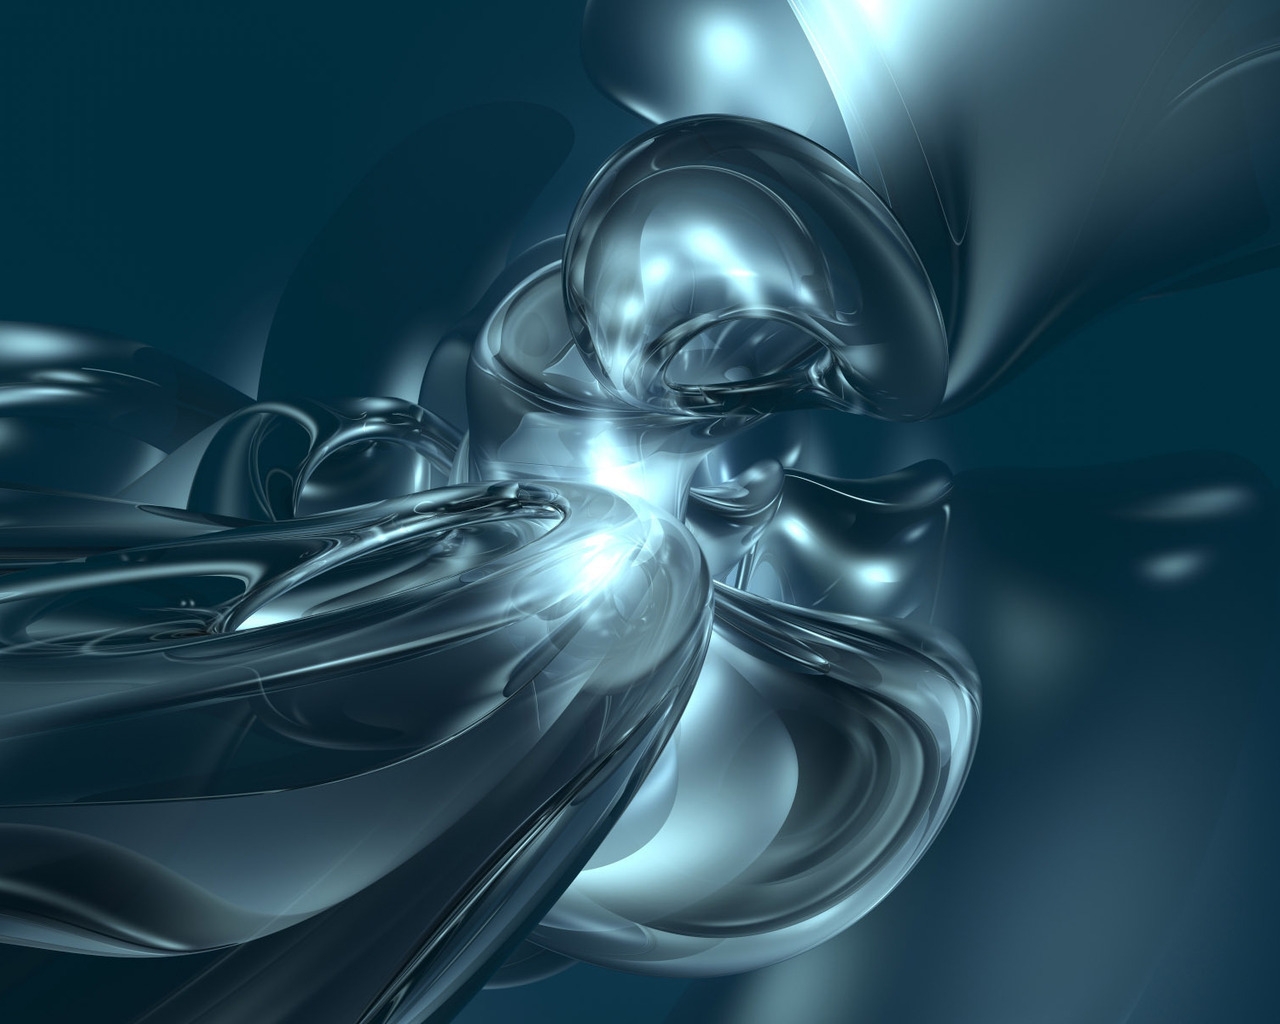 Abstract 3D Creation for 1280 x 1024 resolution